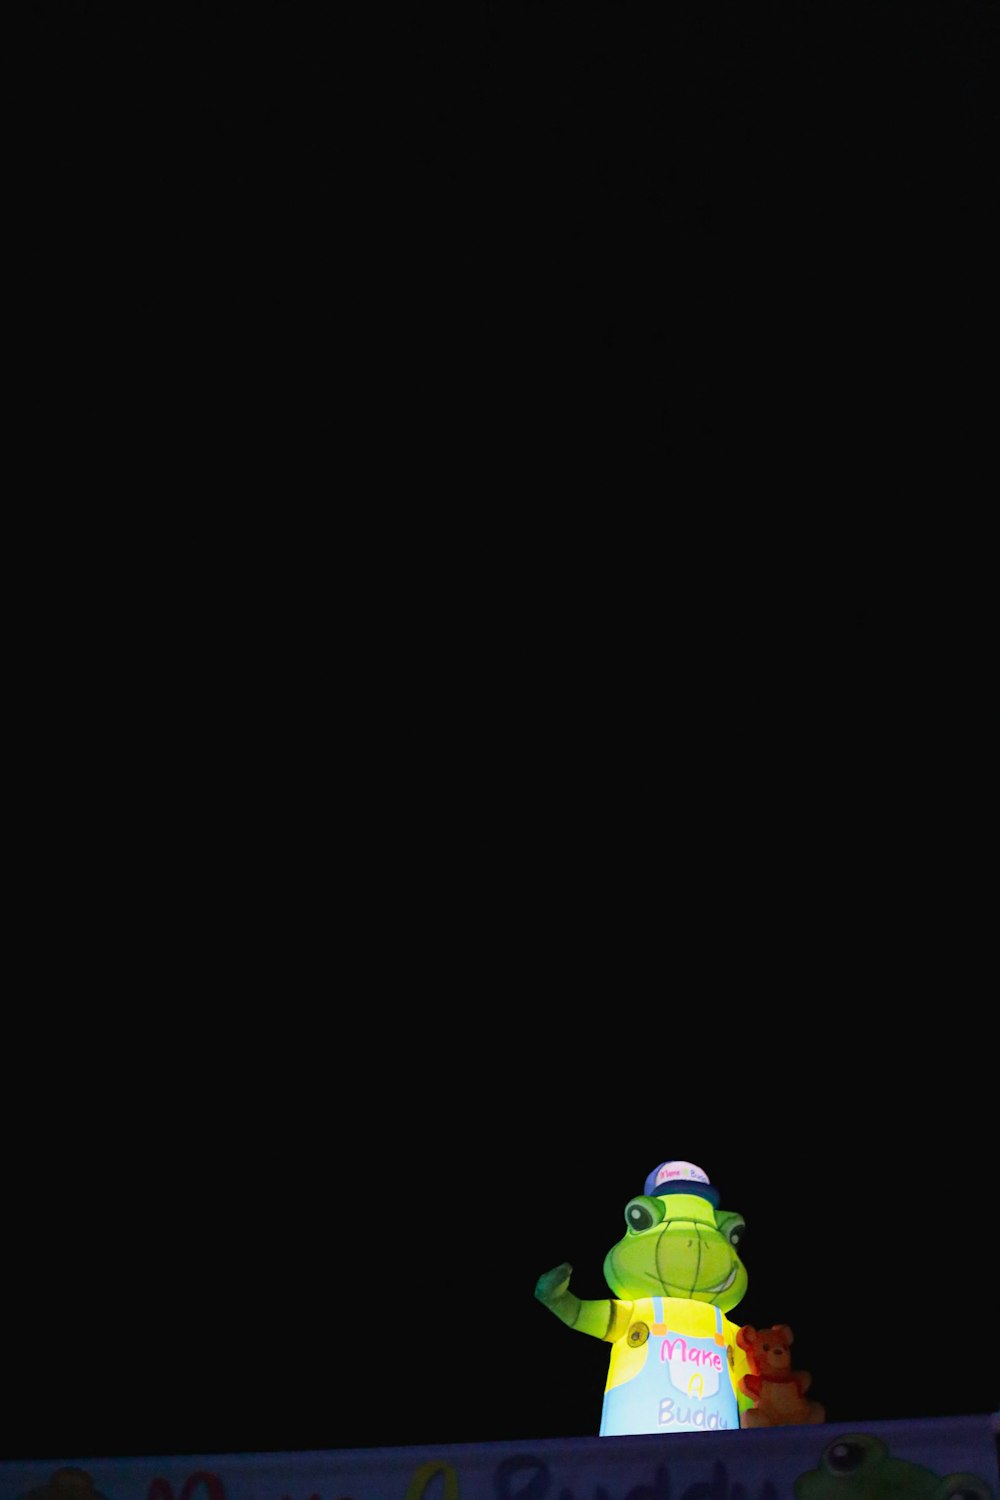 a cartoon character standing in front of a black background